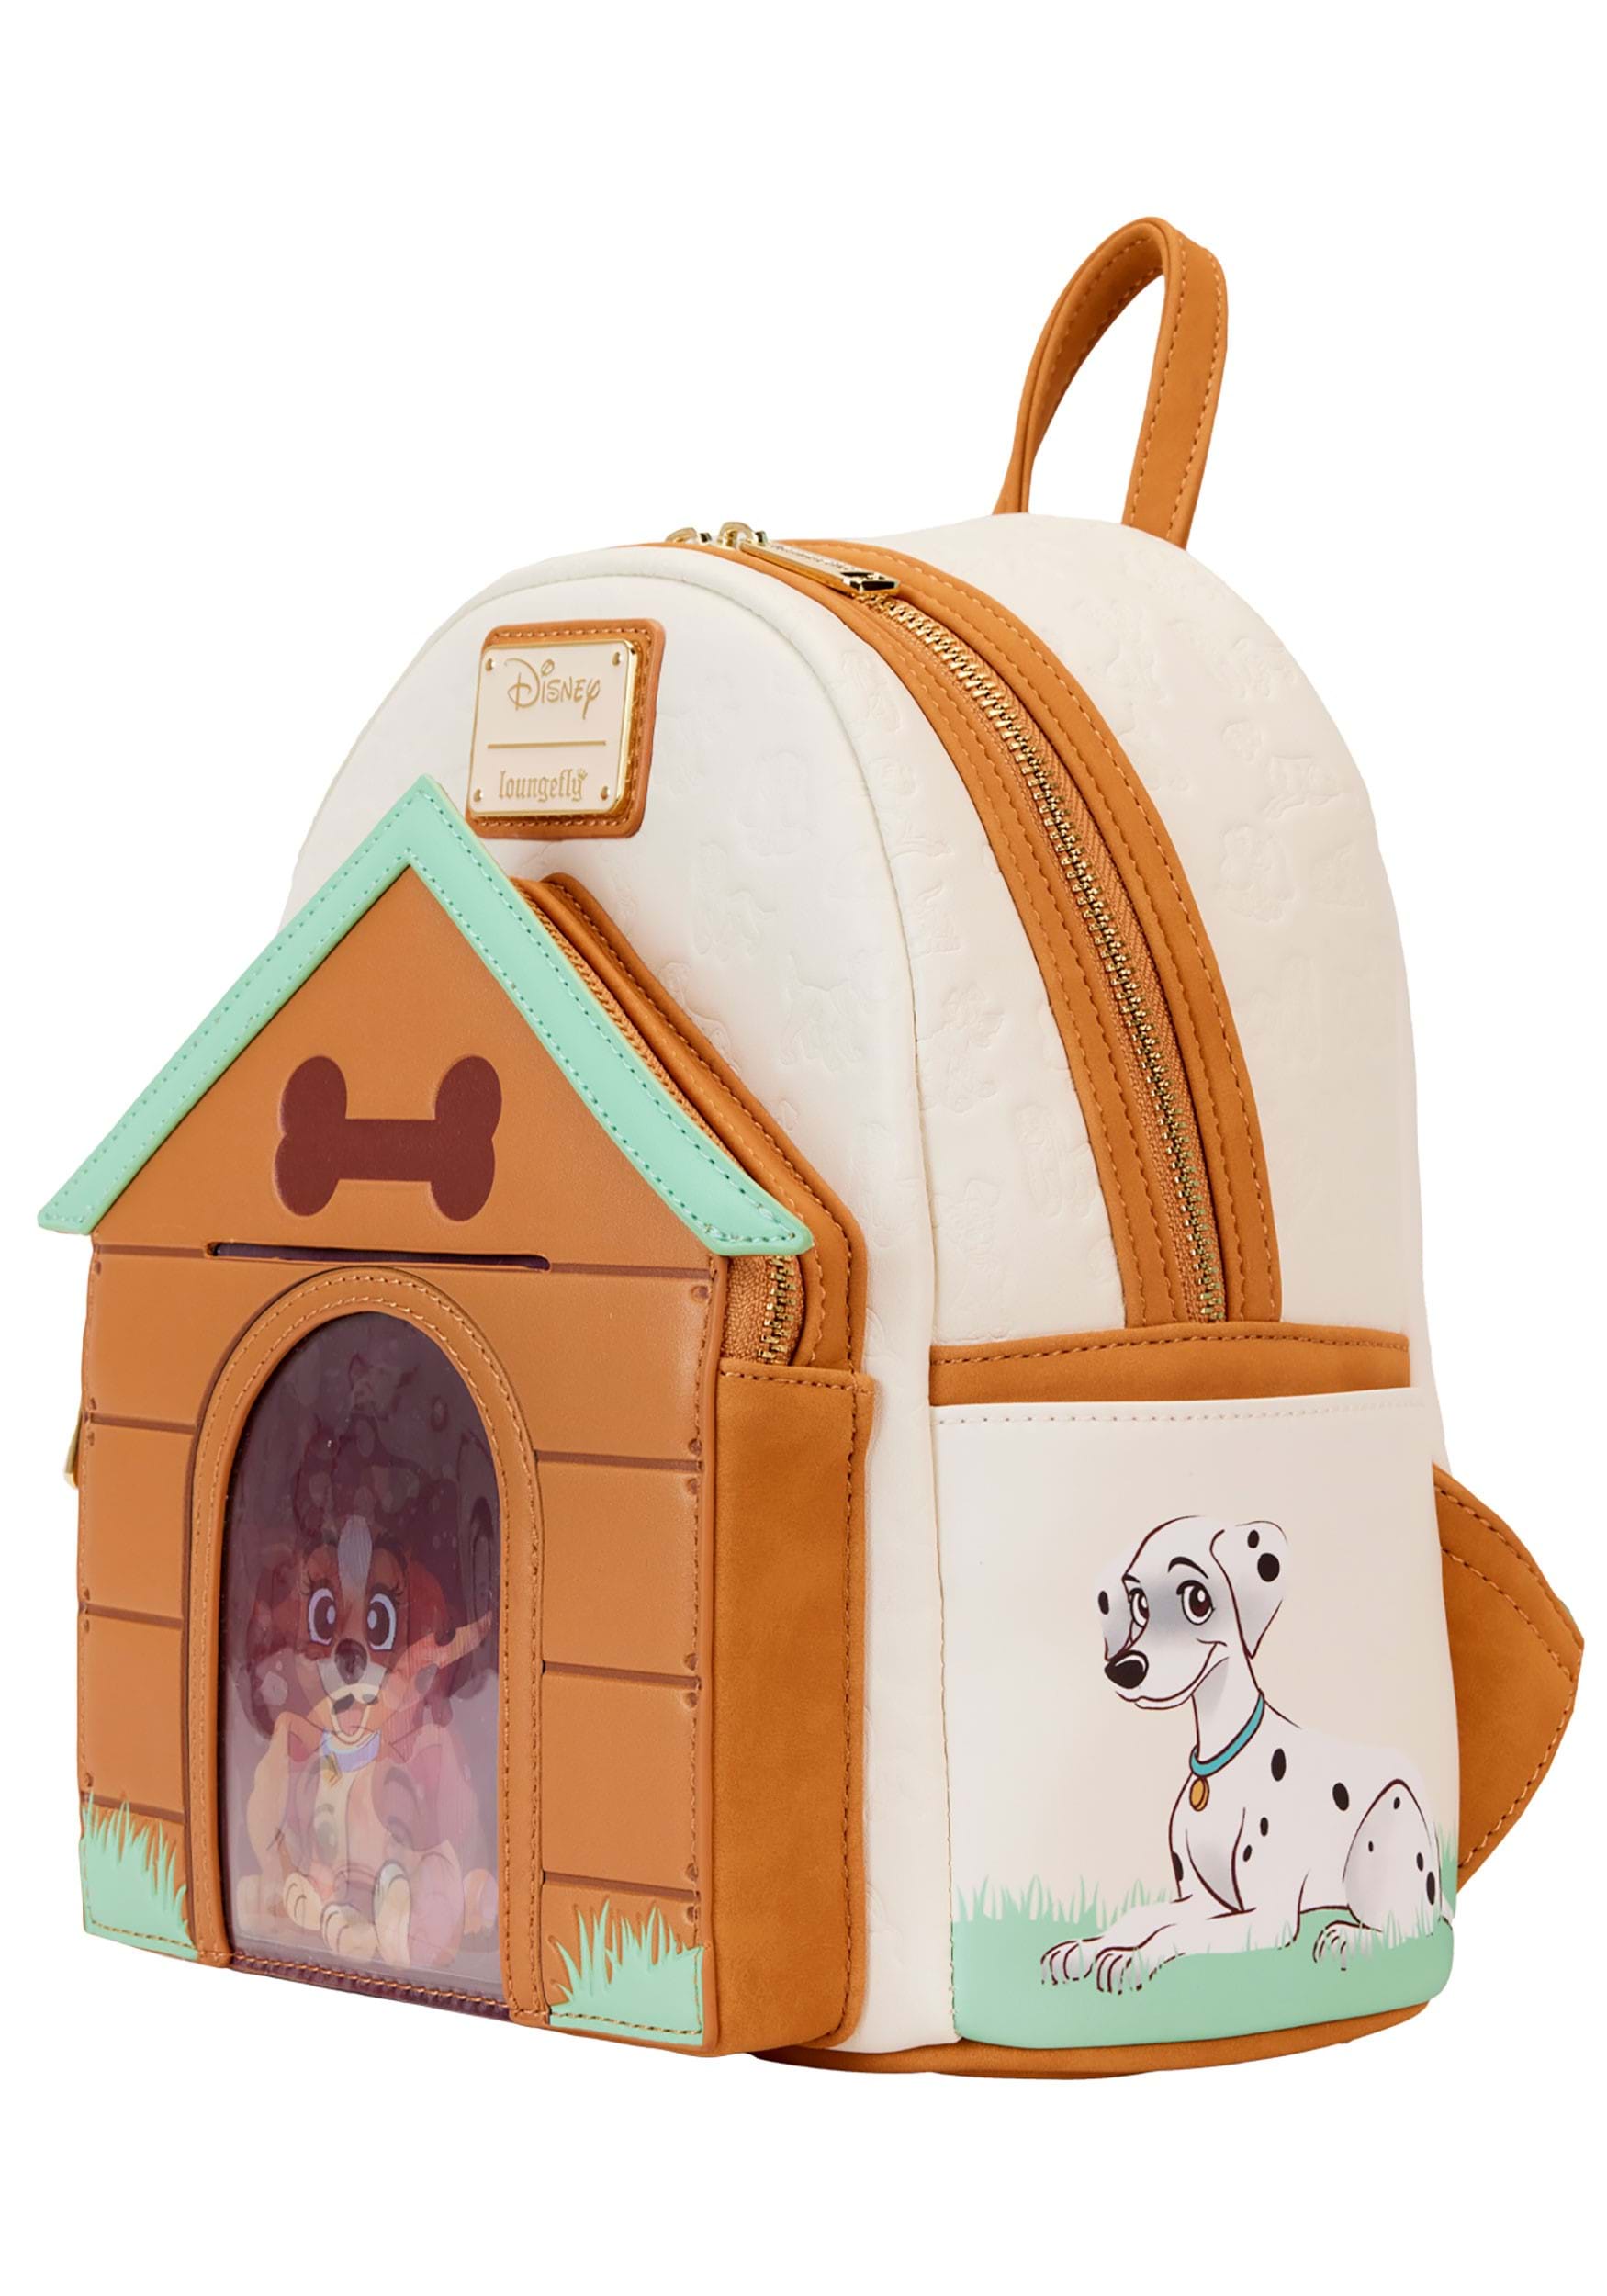 Amazon.com: Disney Princess Style Collection Pet Puppy Plush & Trendy Tote  Bag Carrier - Nurture and Pamper Your Puppy! : Toys & Games